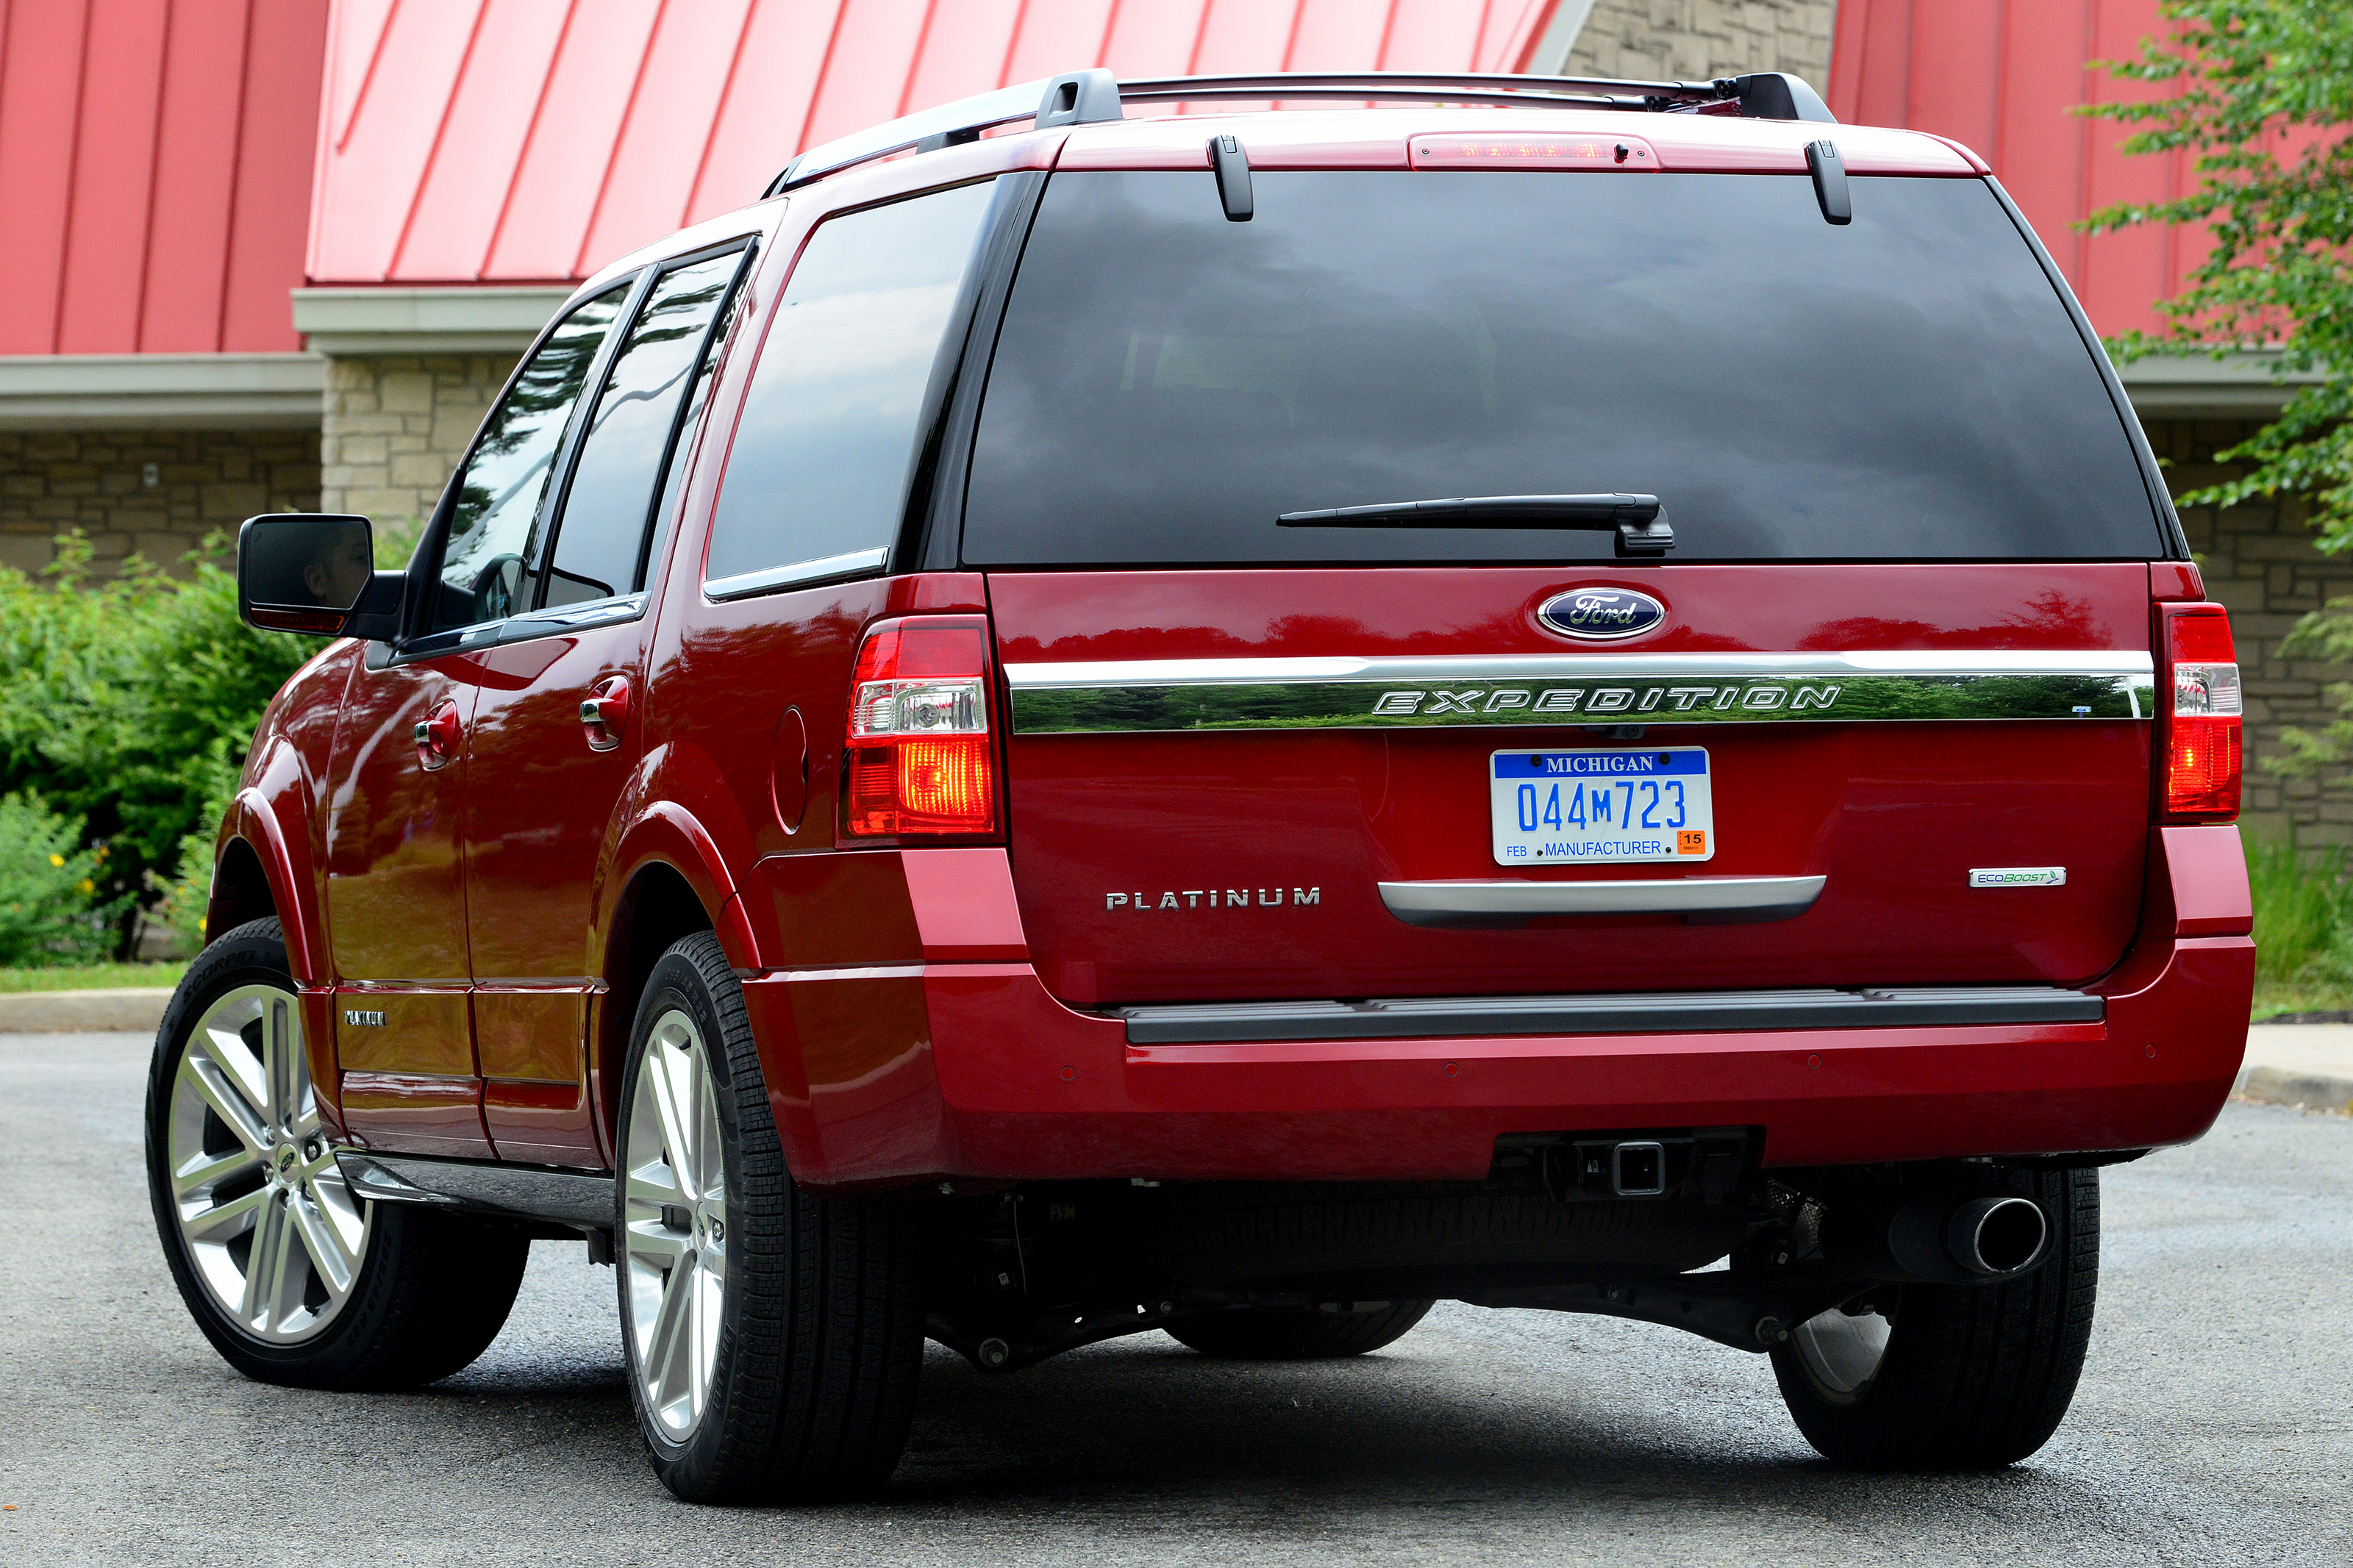 Ford Expedition exterior restyling